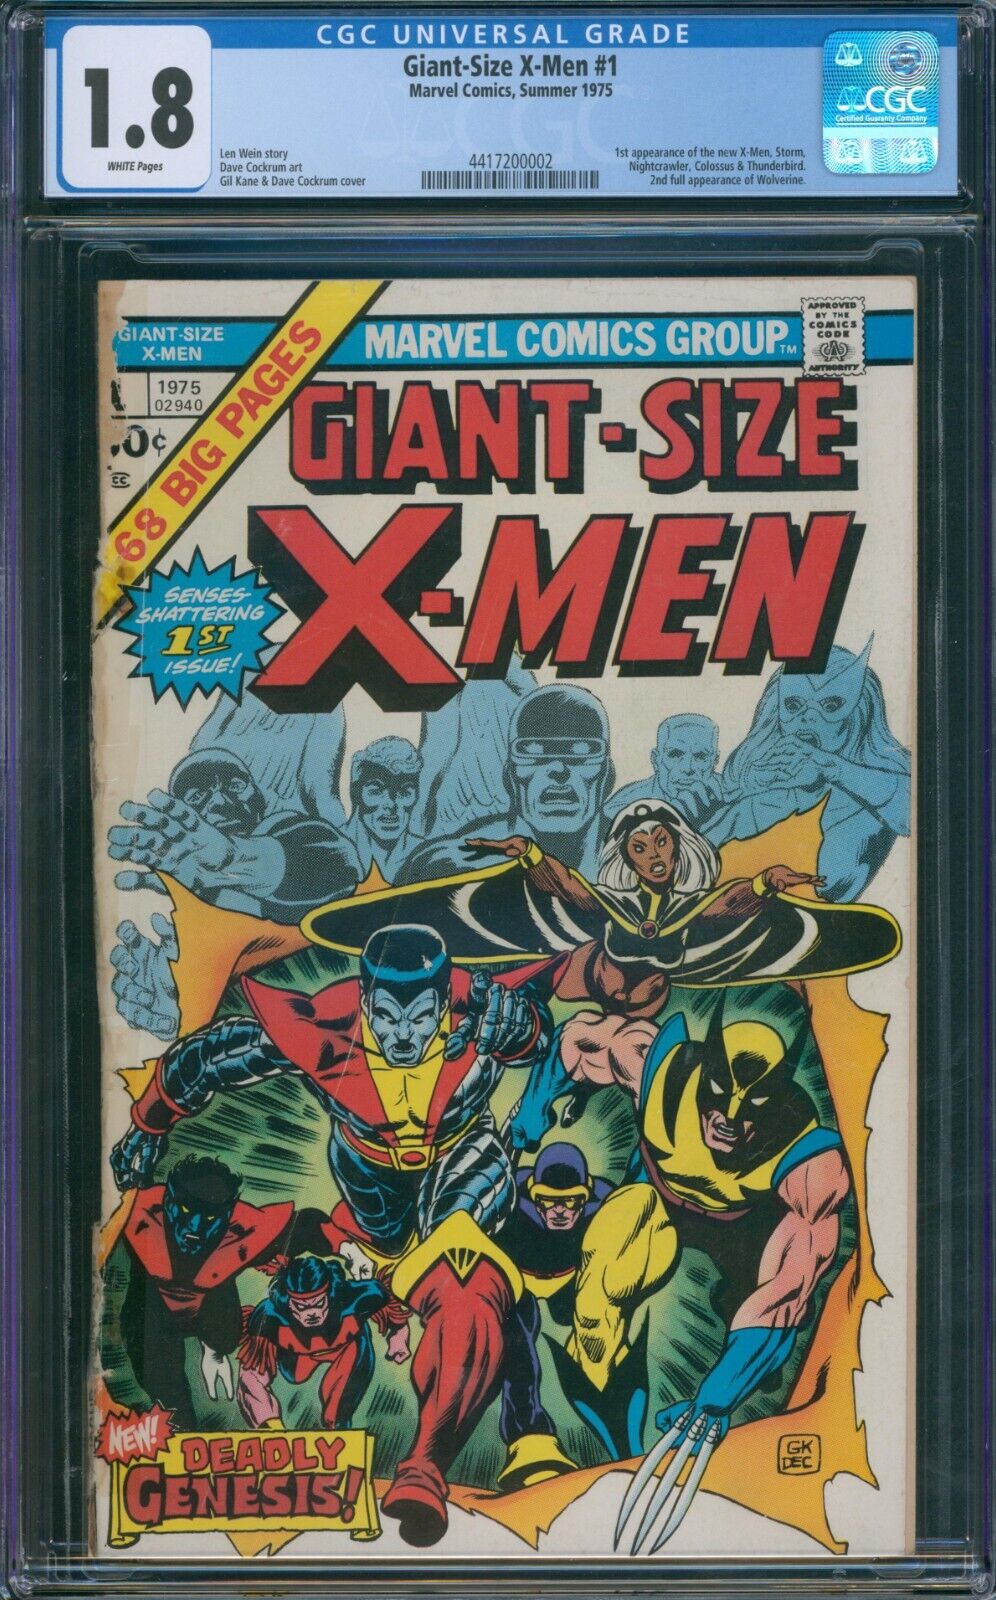 Giant Size X-Men #1 CGC 1.8 Nice Book White Pages 1975 1st App Storm Colossus